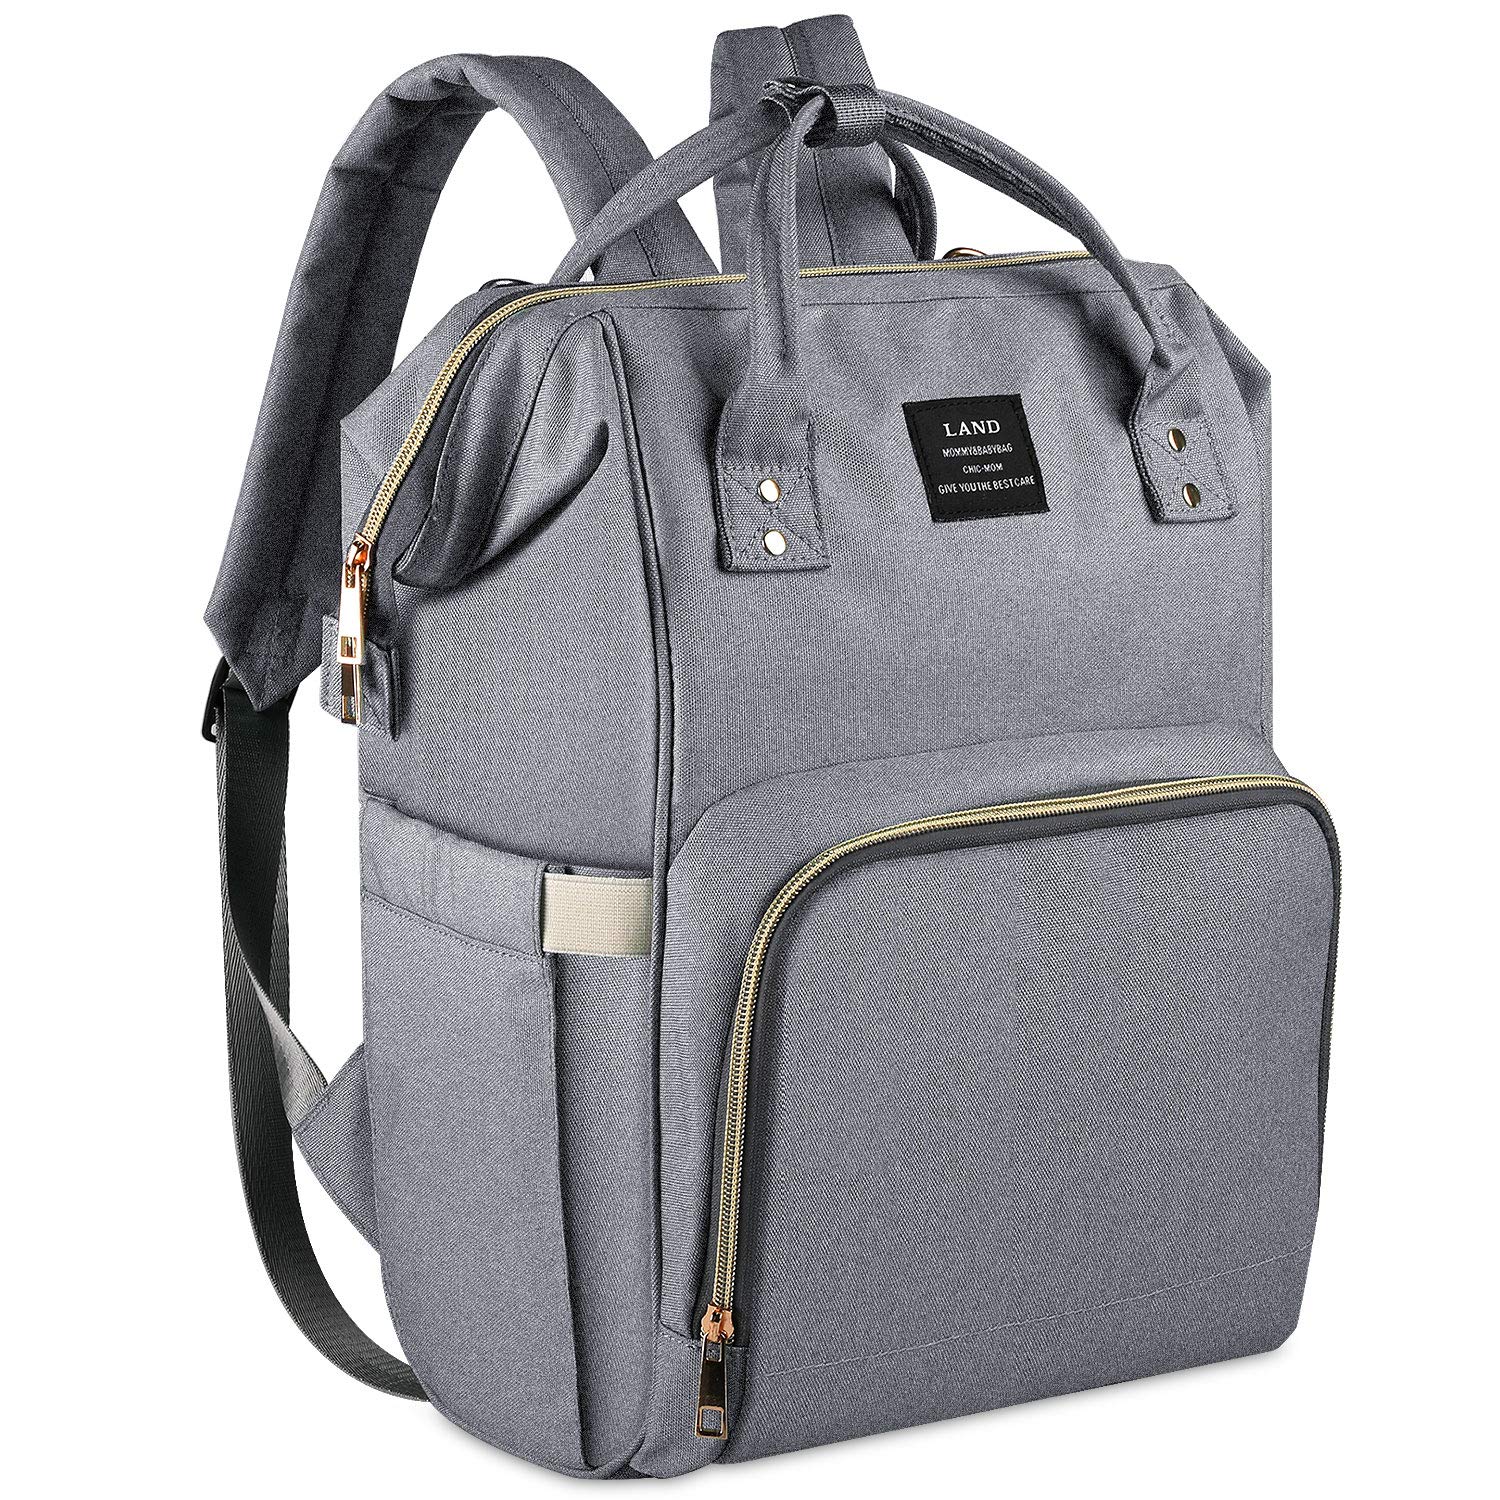 Diaper Bag Backpack,Baby Bags for Mom and Dad Maternity Diaper Bag  ,Multifunction Waterproof Baby Diaper Bag Large Capacity- Grey, Grey :  : Baby Products